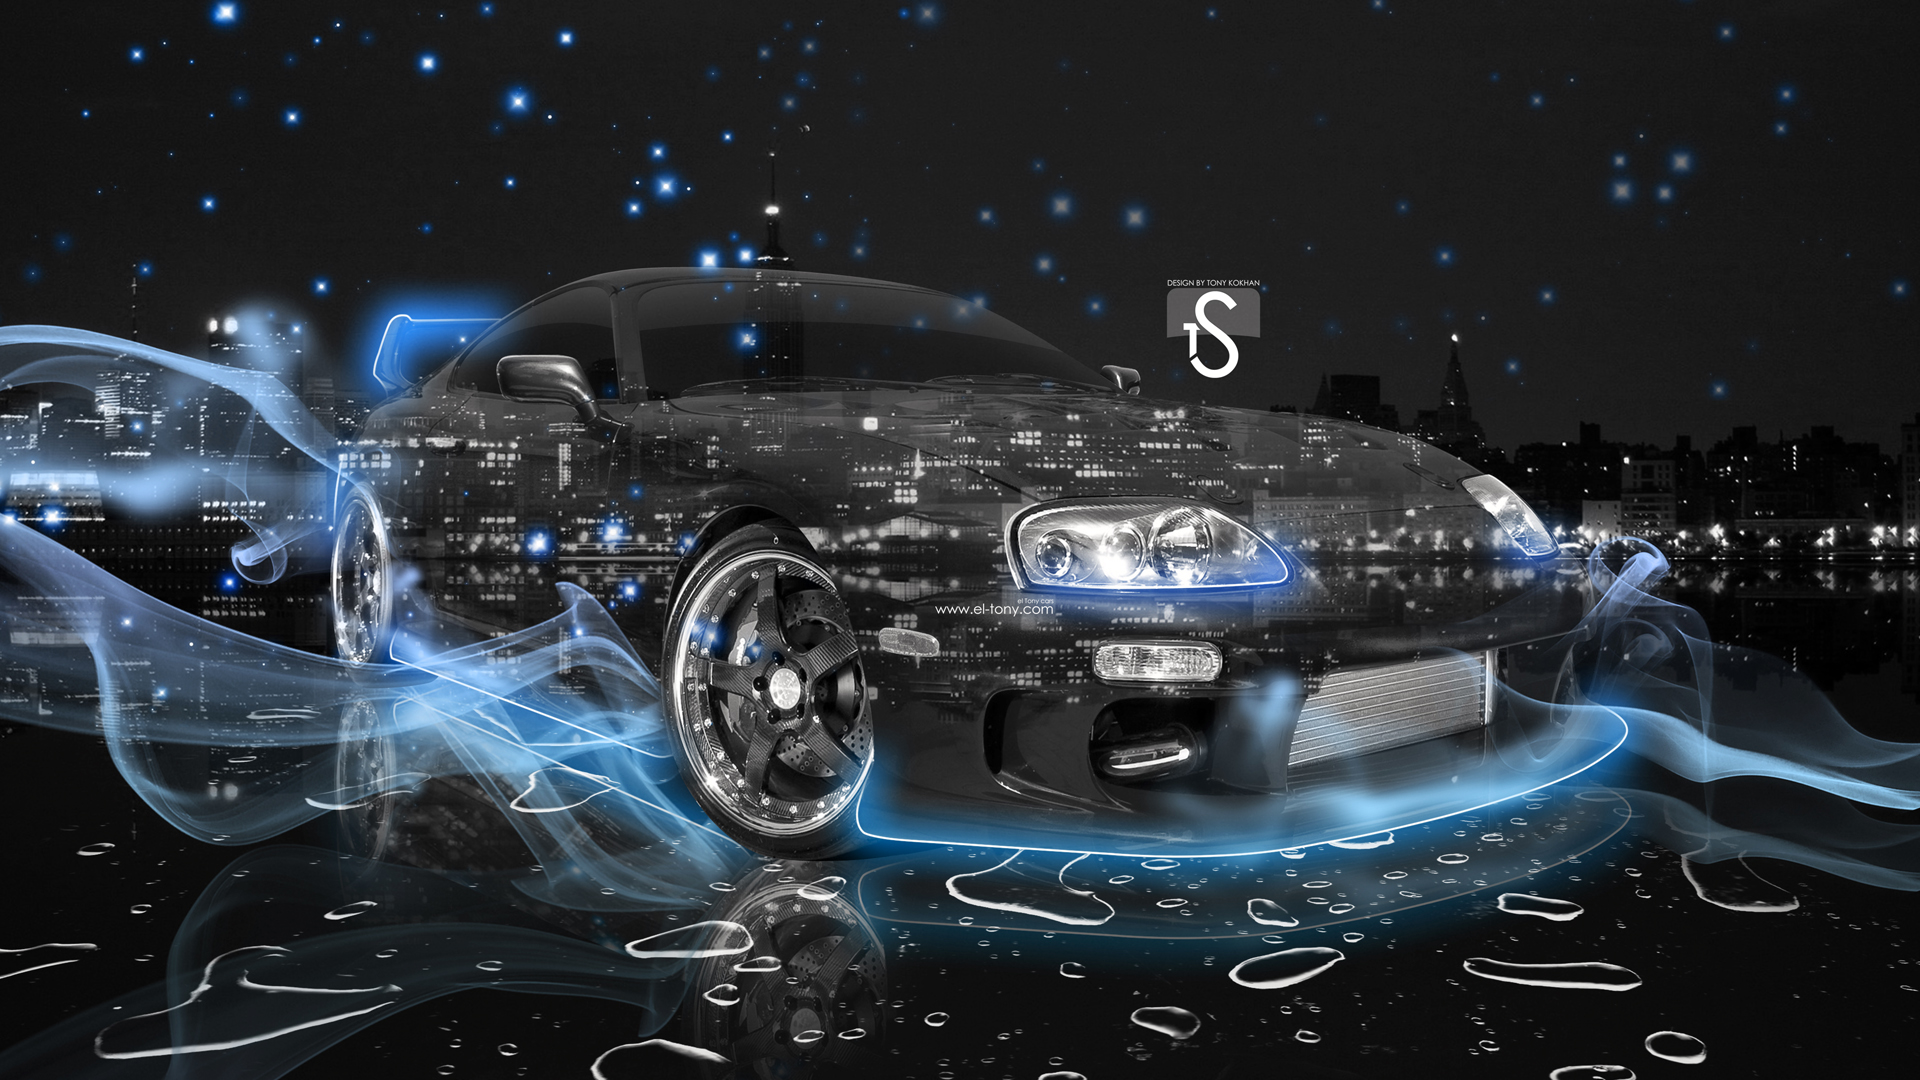 Toyota Supra City Light Exclusive HD Wallpapers 391